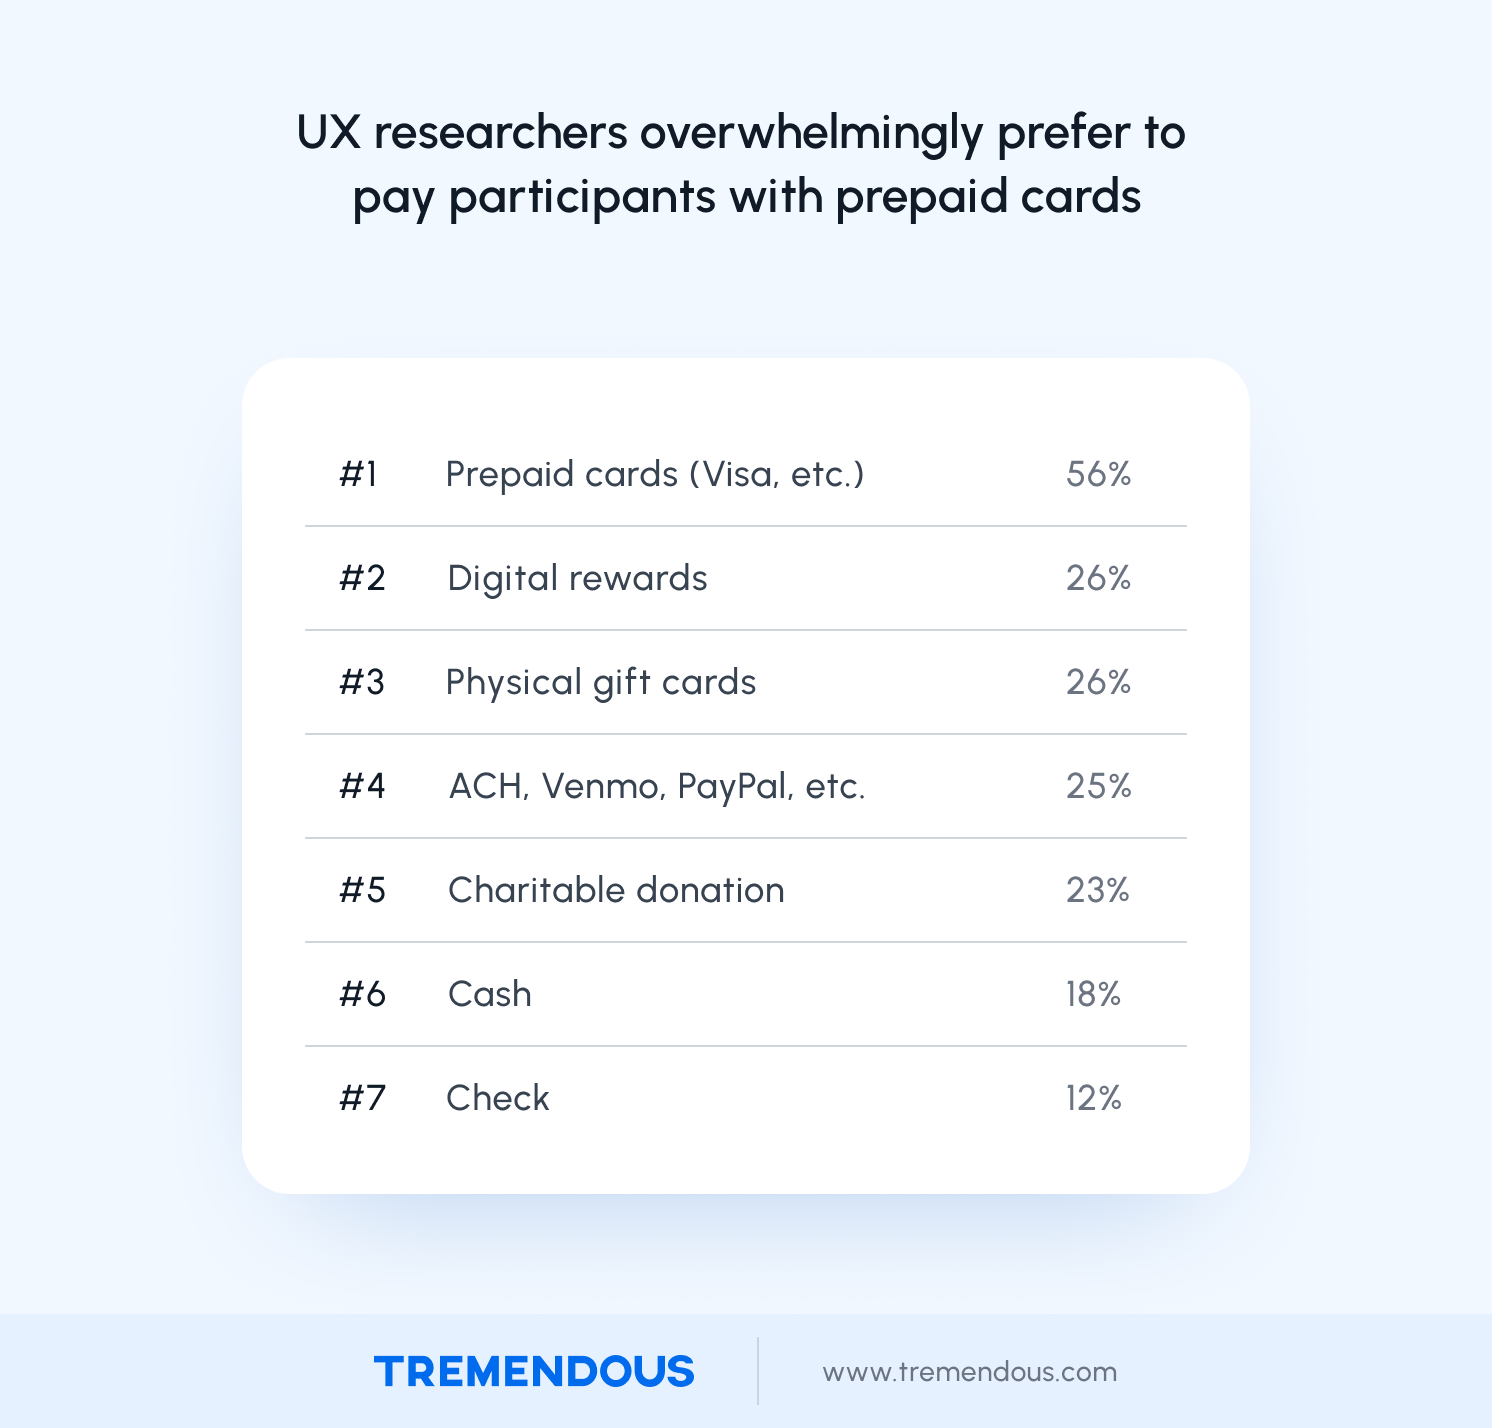 UX researchers overwhelmingly prefer to pay participants with prepaid cards